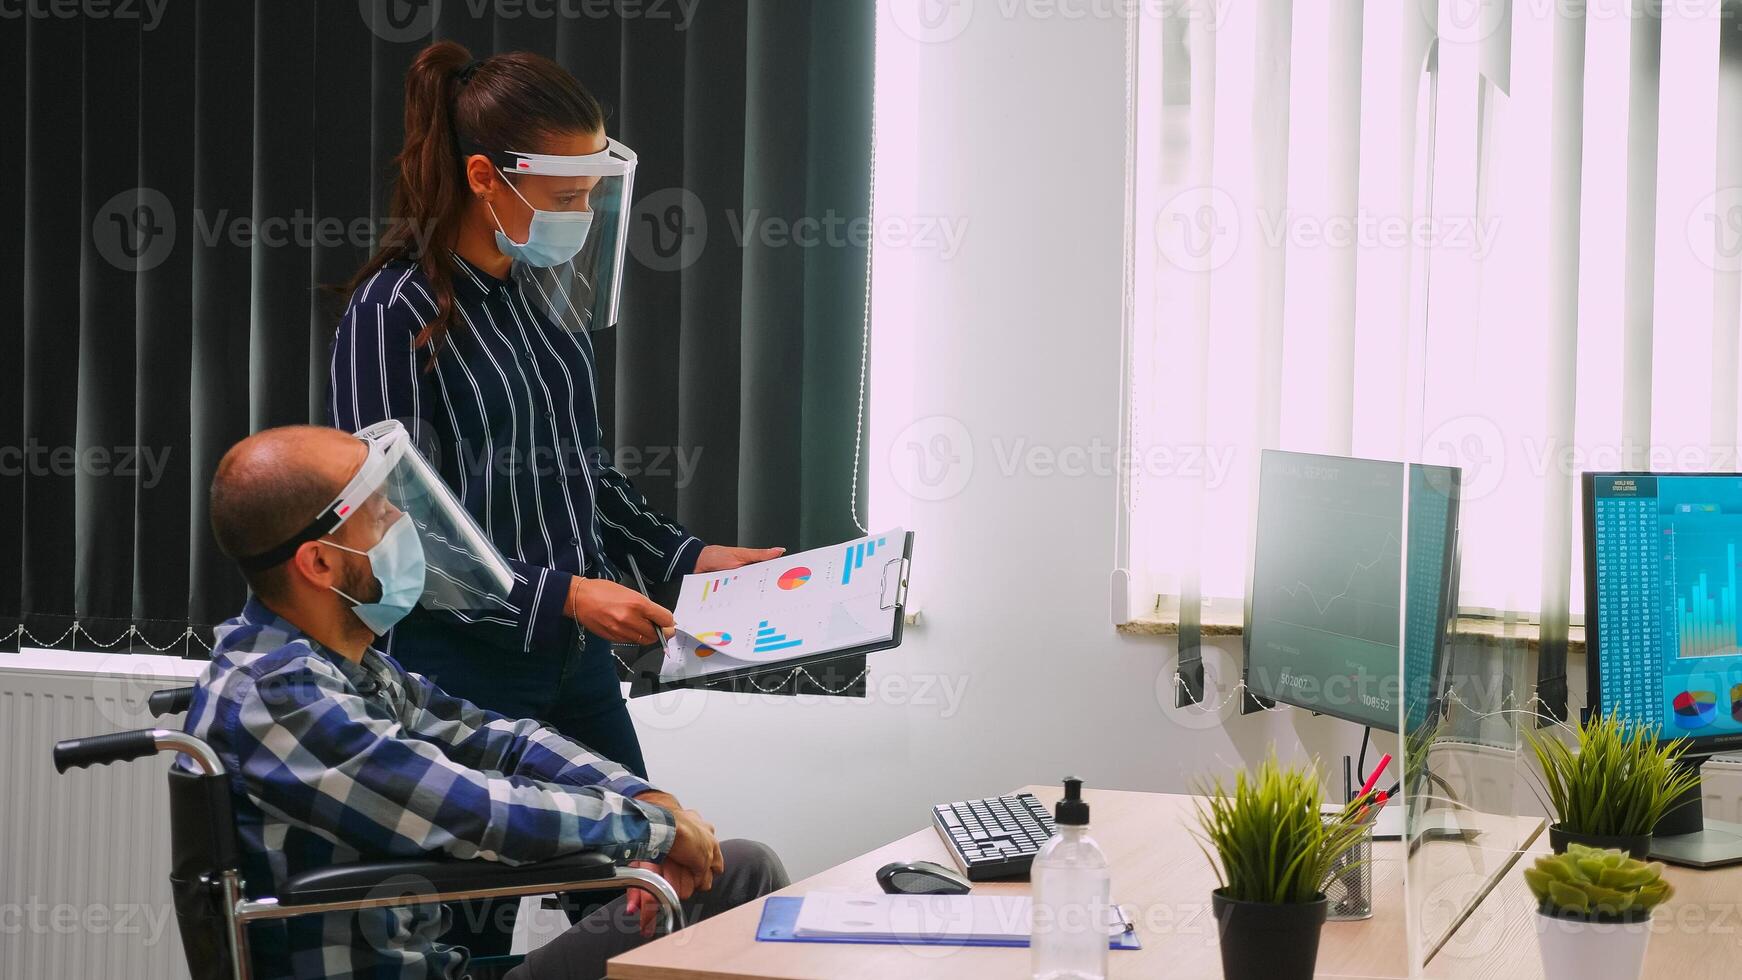 Business people wearing protective mask in new normal office discussing strategy, businessman sitting in wheelchair. Team working in profesional workspace in corporate company during covid-19 pandemic photo